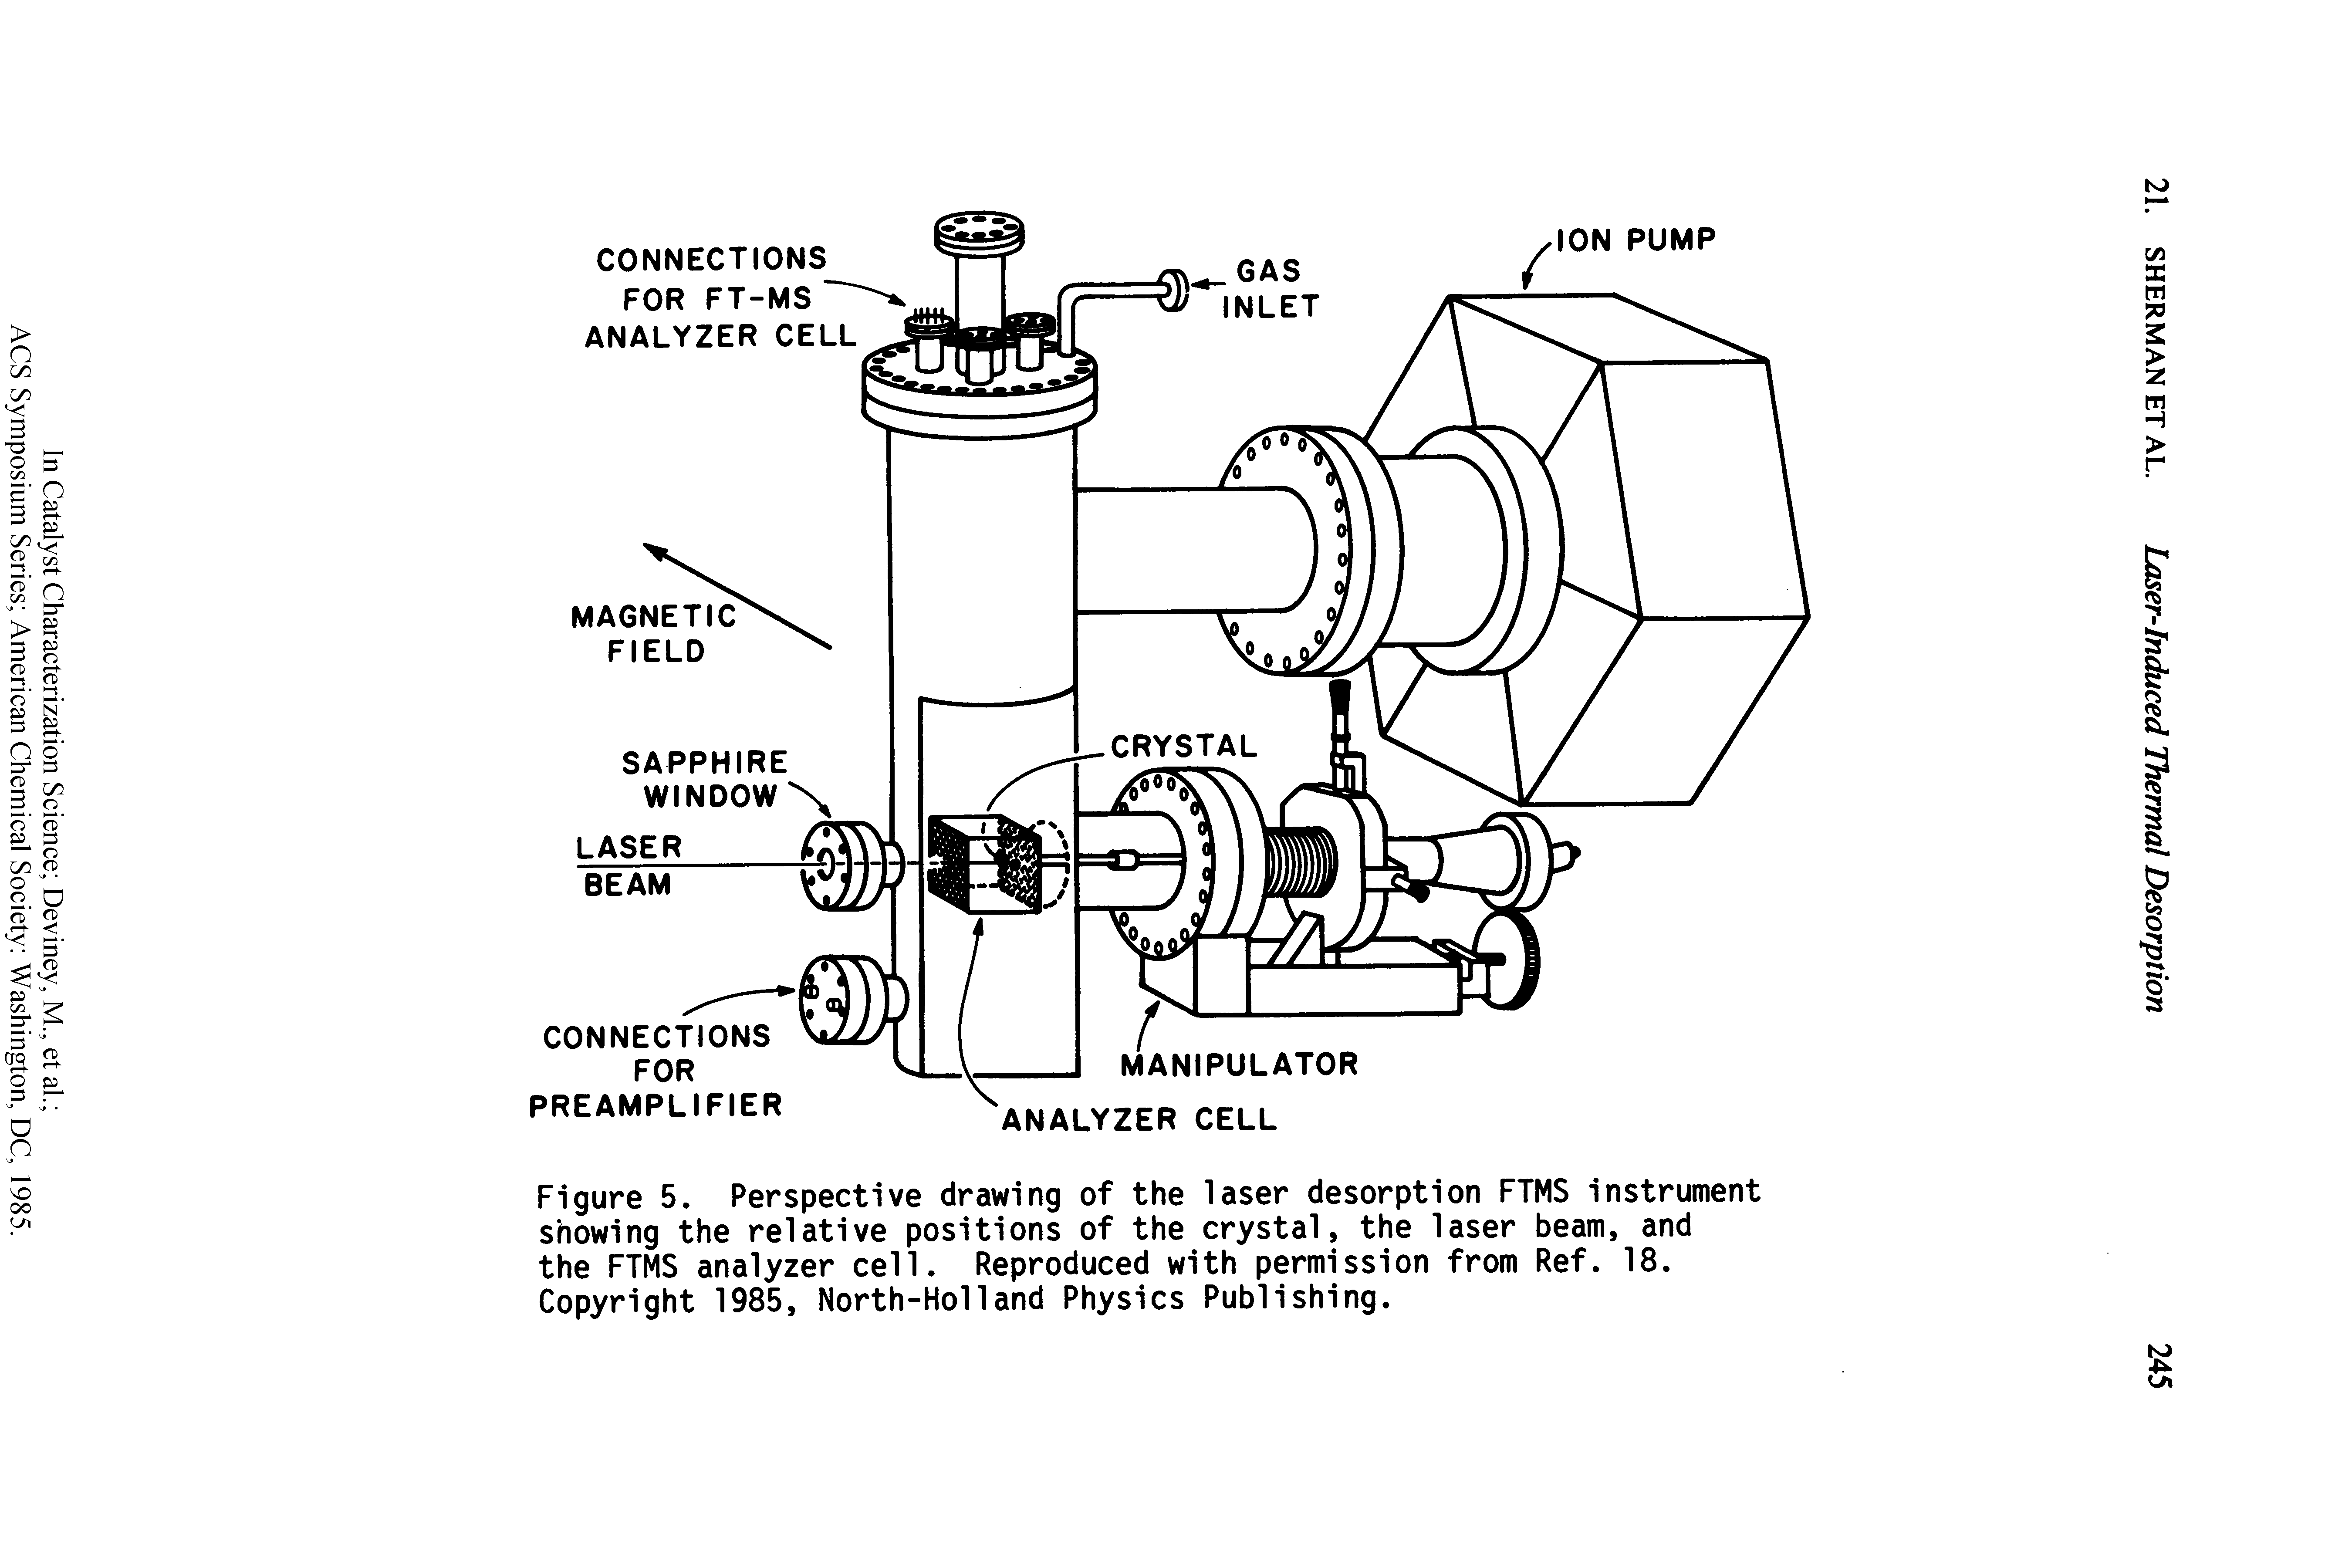 Figure 5. Perspective drawing of the laser desorption FTMS instrument showing the relative positions of the crystal, the laser beam, and the FTMS analyzer cell. Reproduced with permission from Ref. 18. Copyright 1985, North-Holi and Physics Publishing.